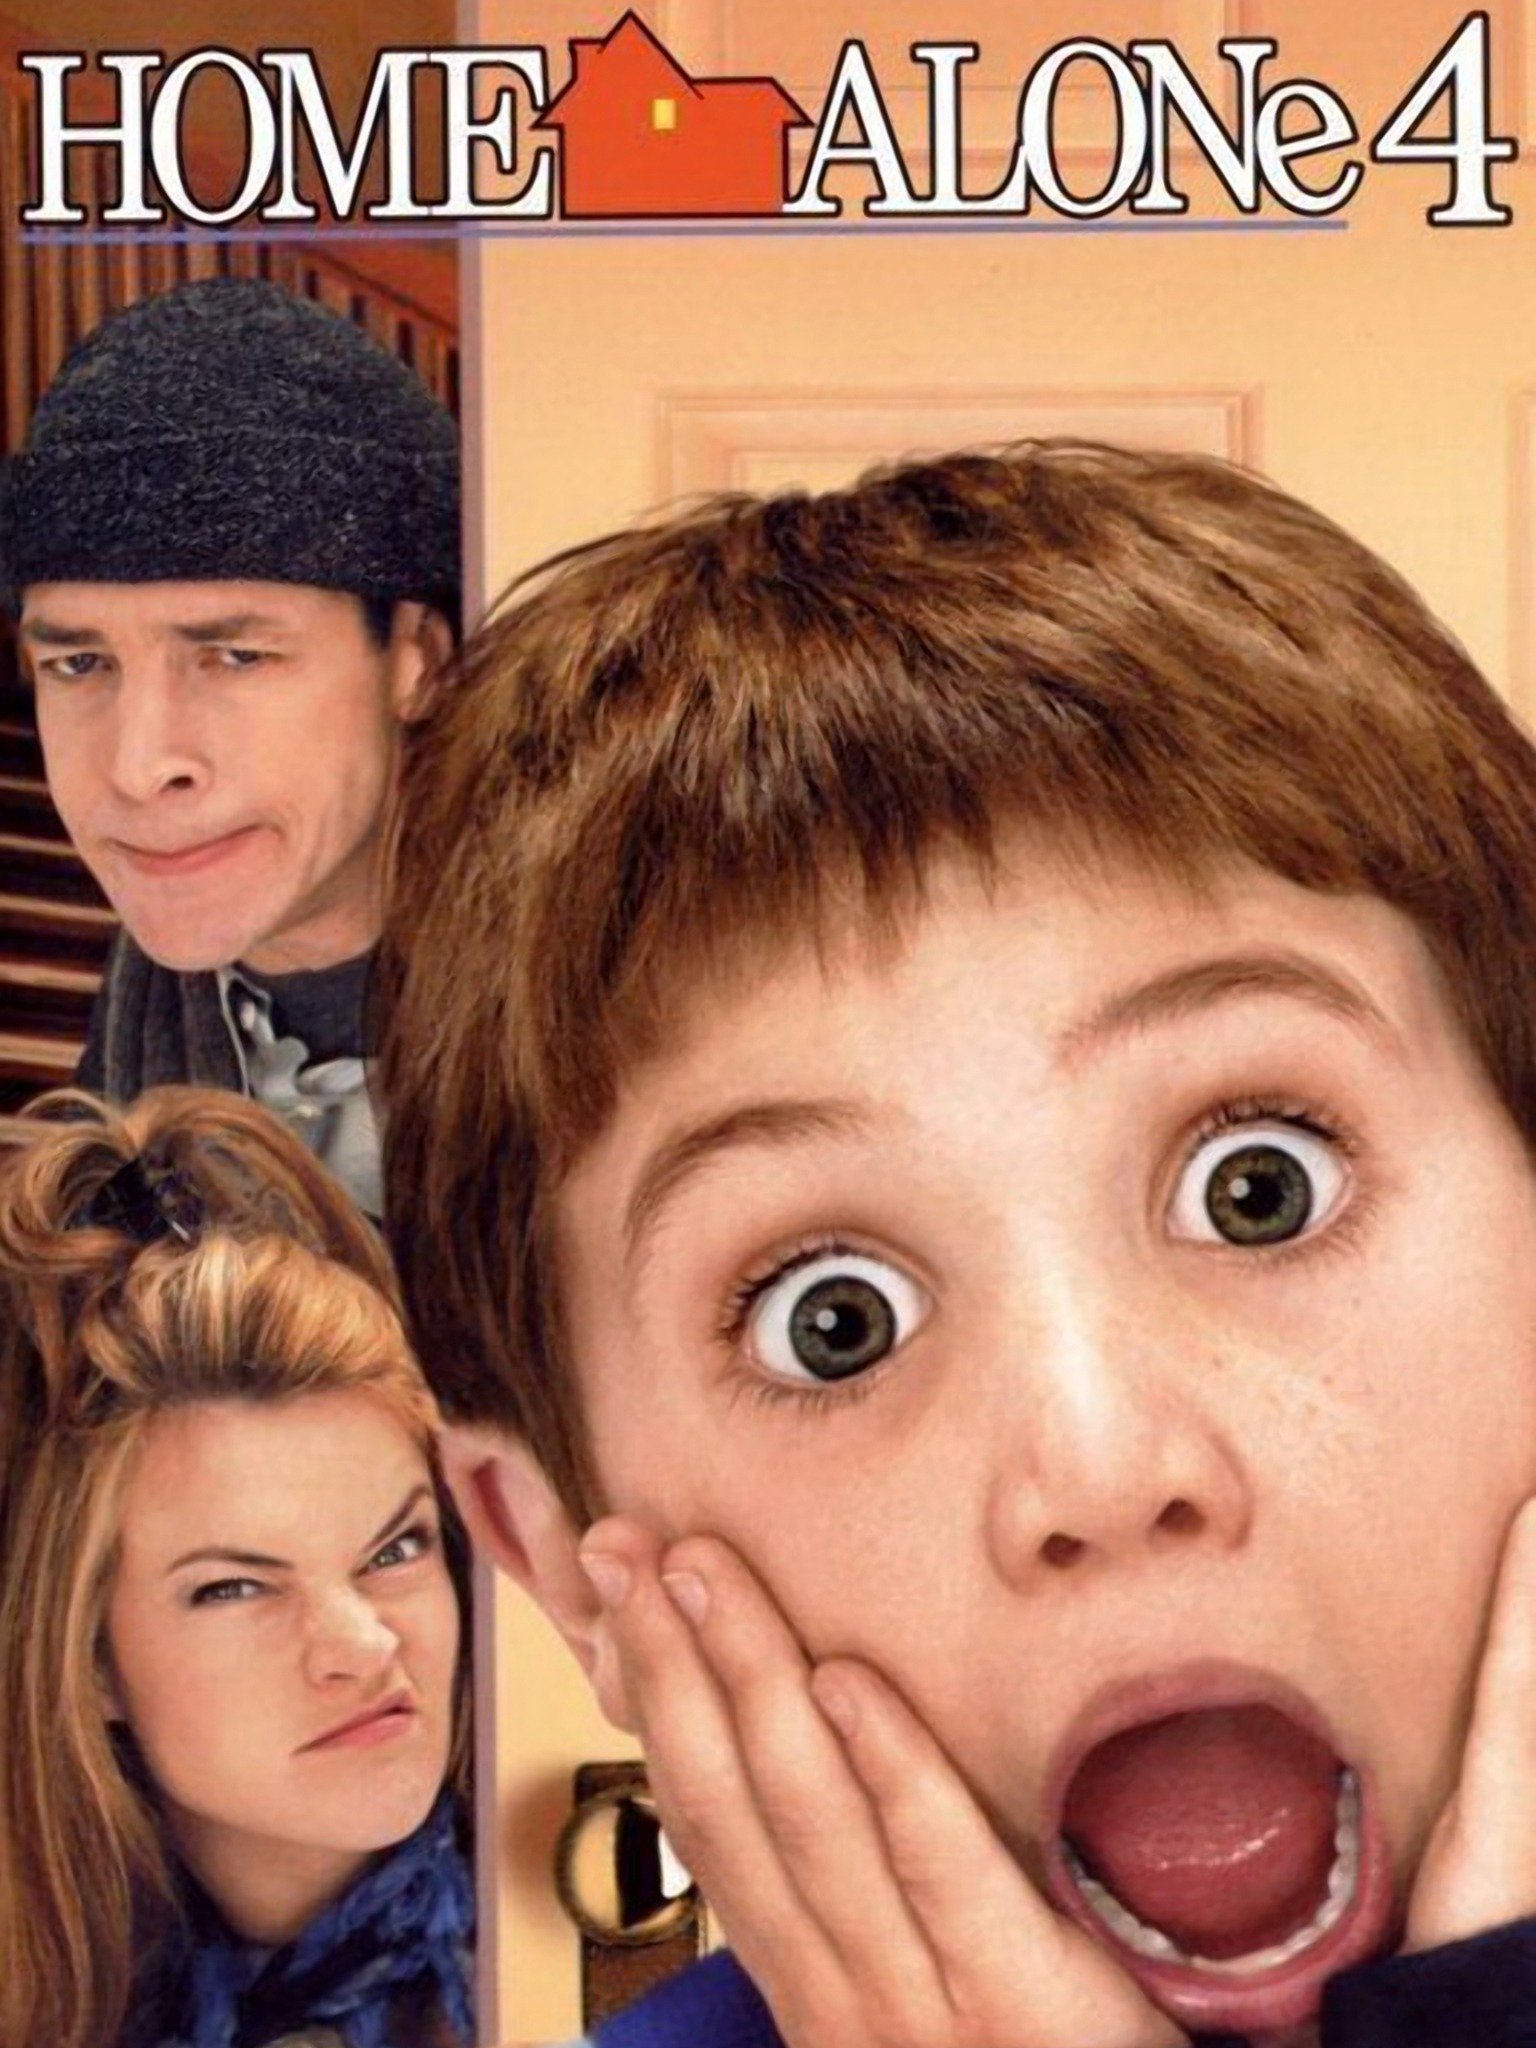 watch online home alone full movie